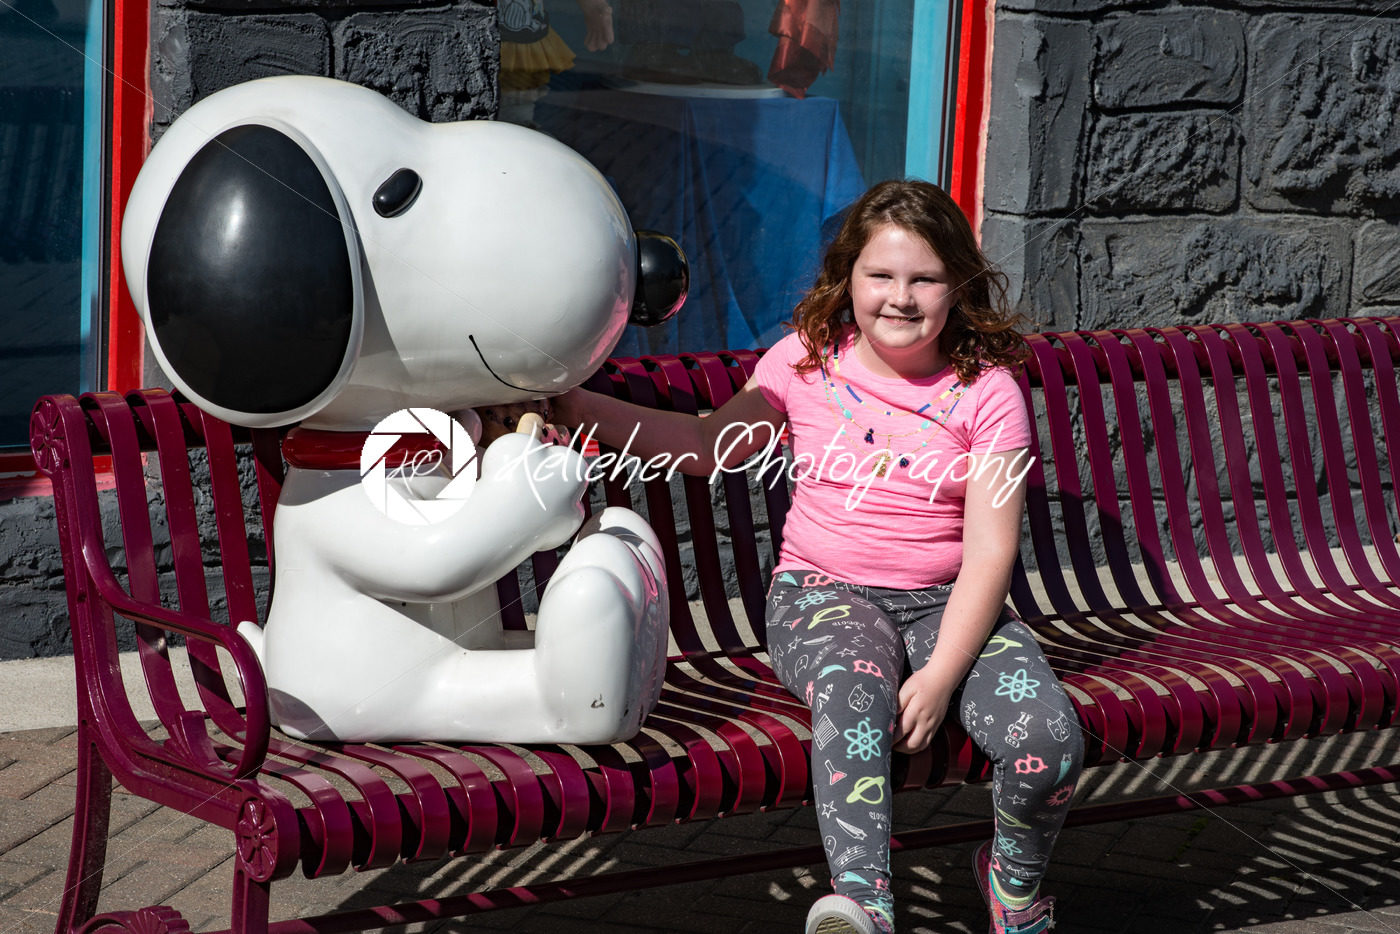 ALLENTOWN, PA – OCTOBER 22: Planet Snoopy at Dorney Park in Allentown, Pennsylvania - Kelleher Photography Store